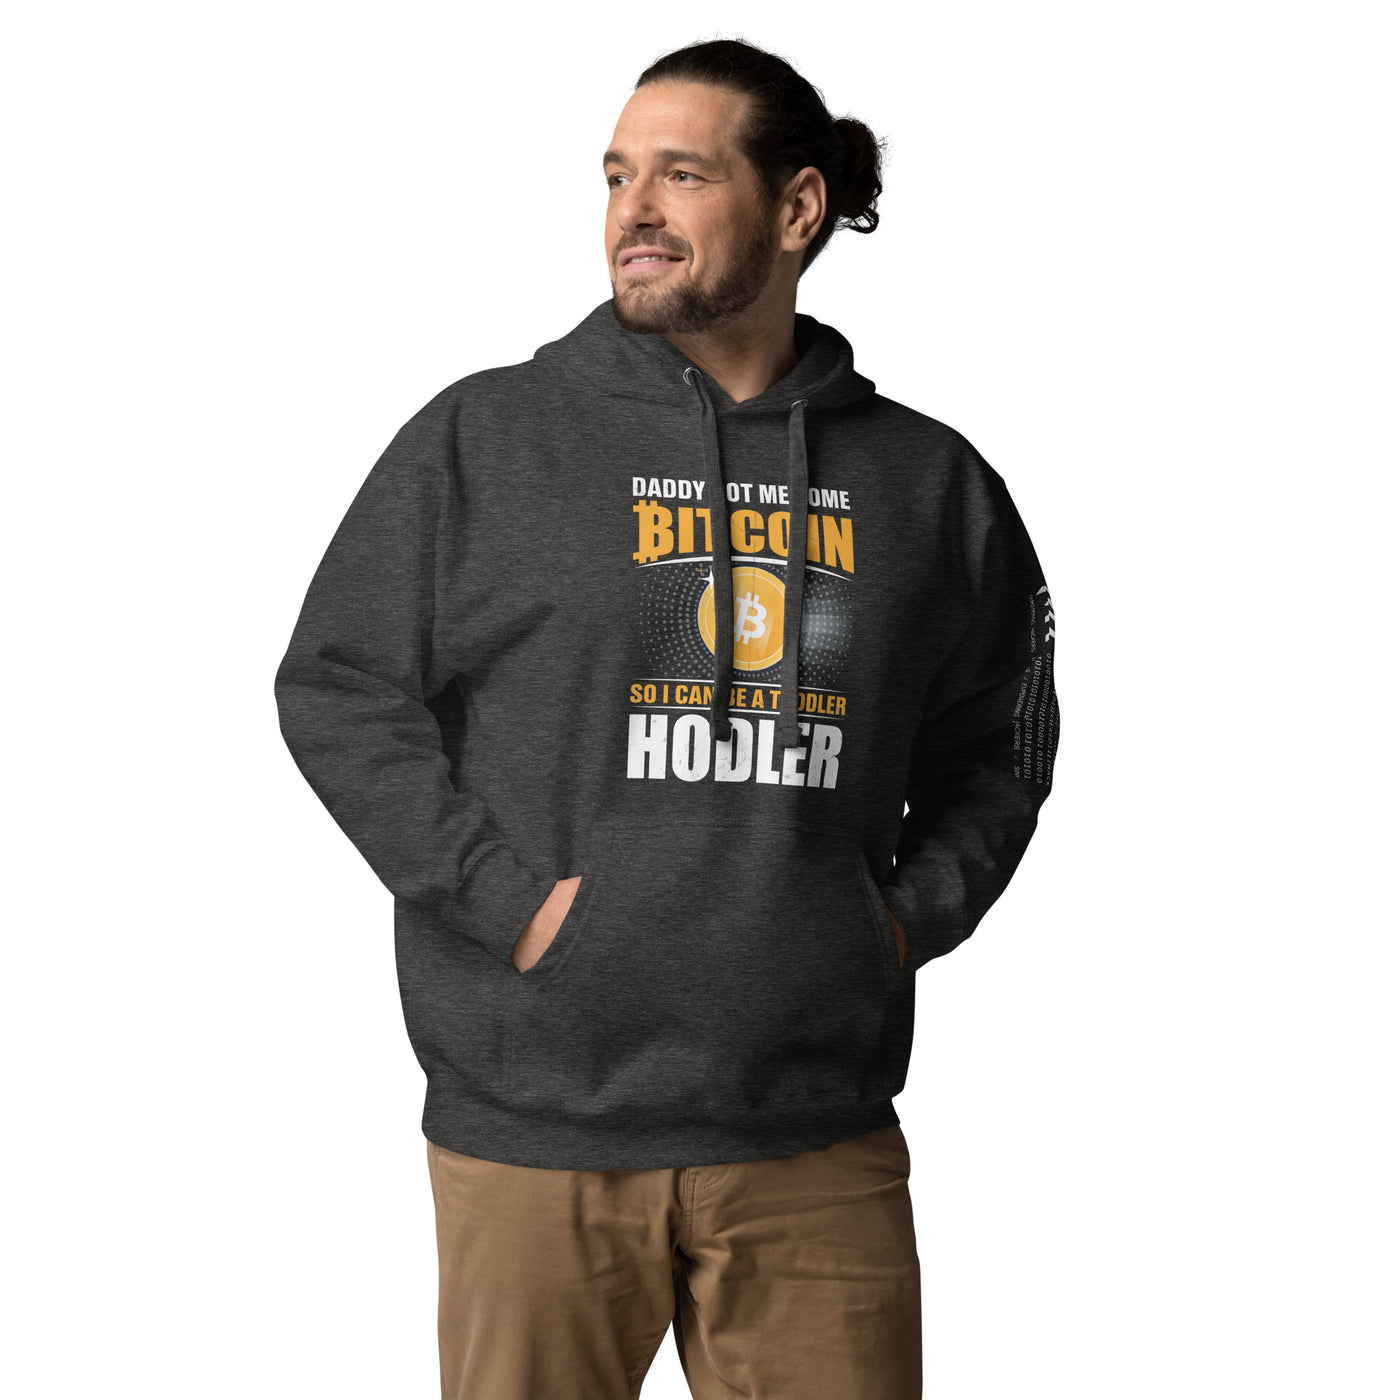 Daddy got me some Bitcoin, so I can be toddler holder - Unisex Hoodie